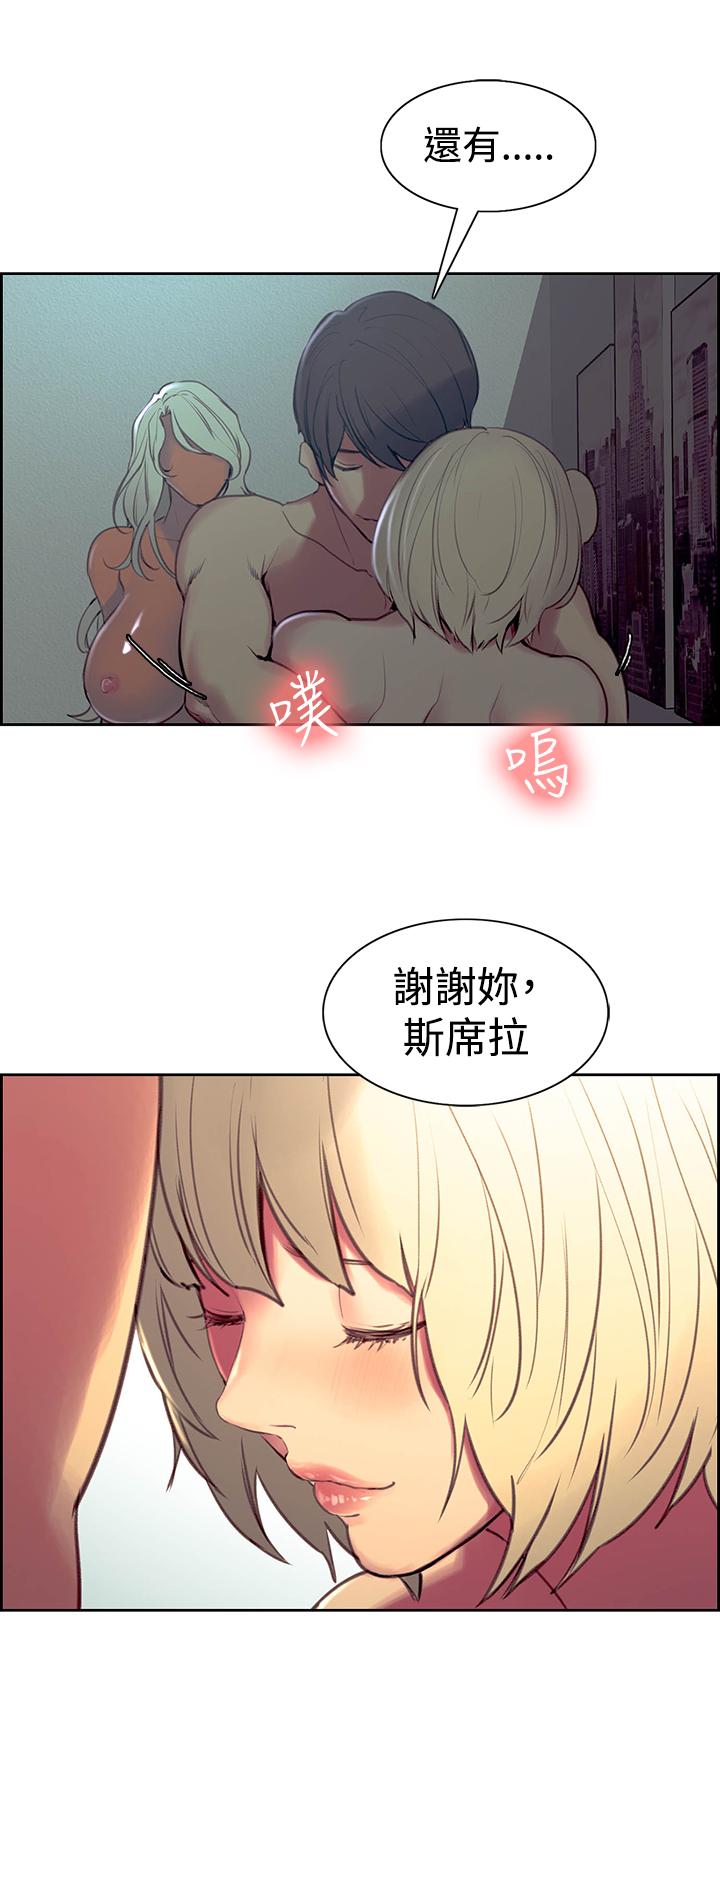 Blowjob [Serious] Domesticate the Housekeeper 调教家政妇 Ch.29~42 [Chinese]中文 Coeds - Page 251